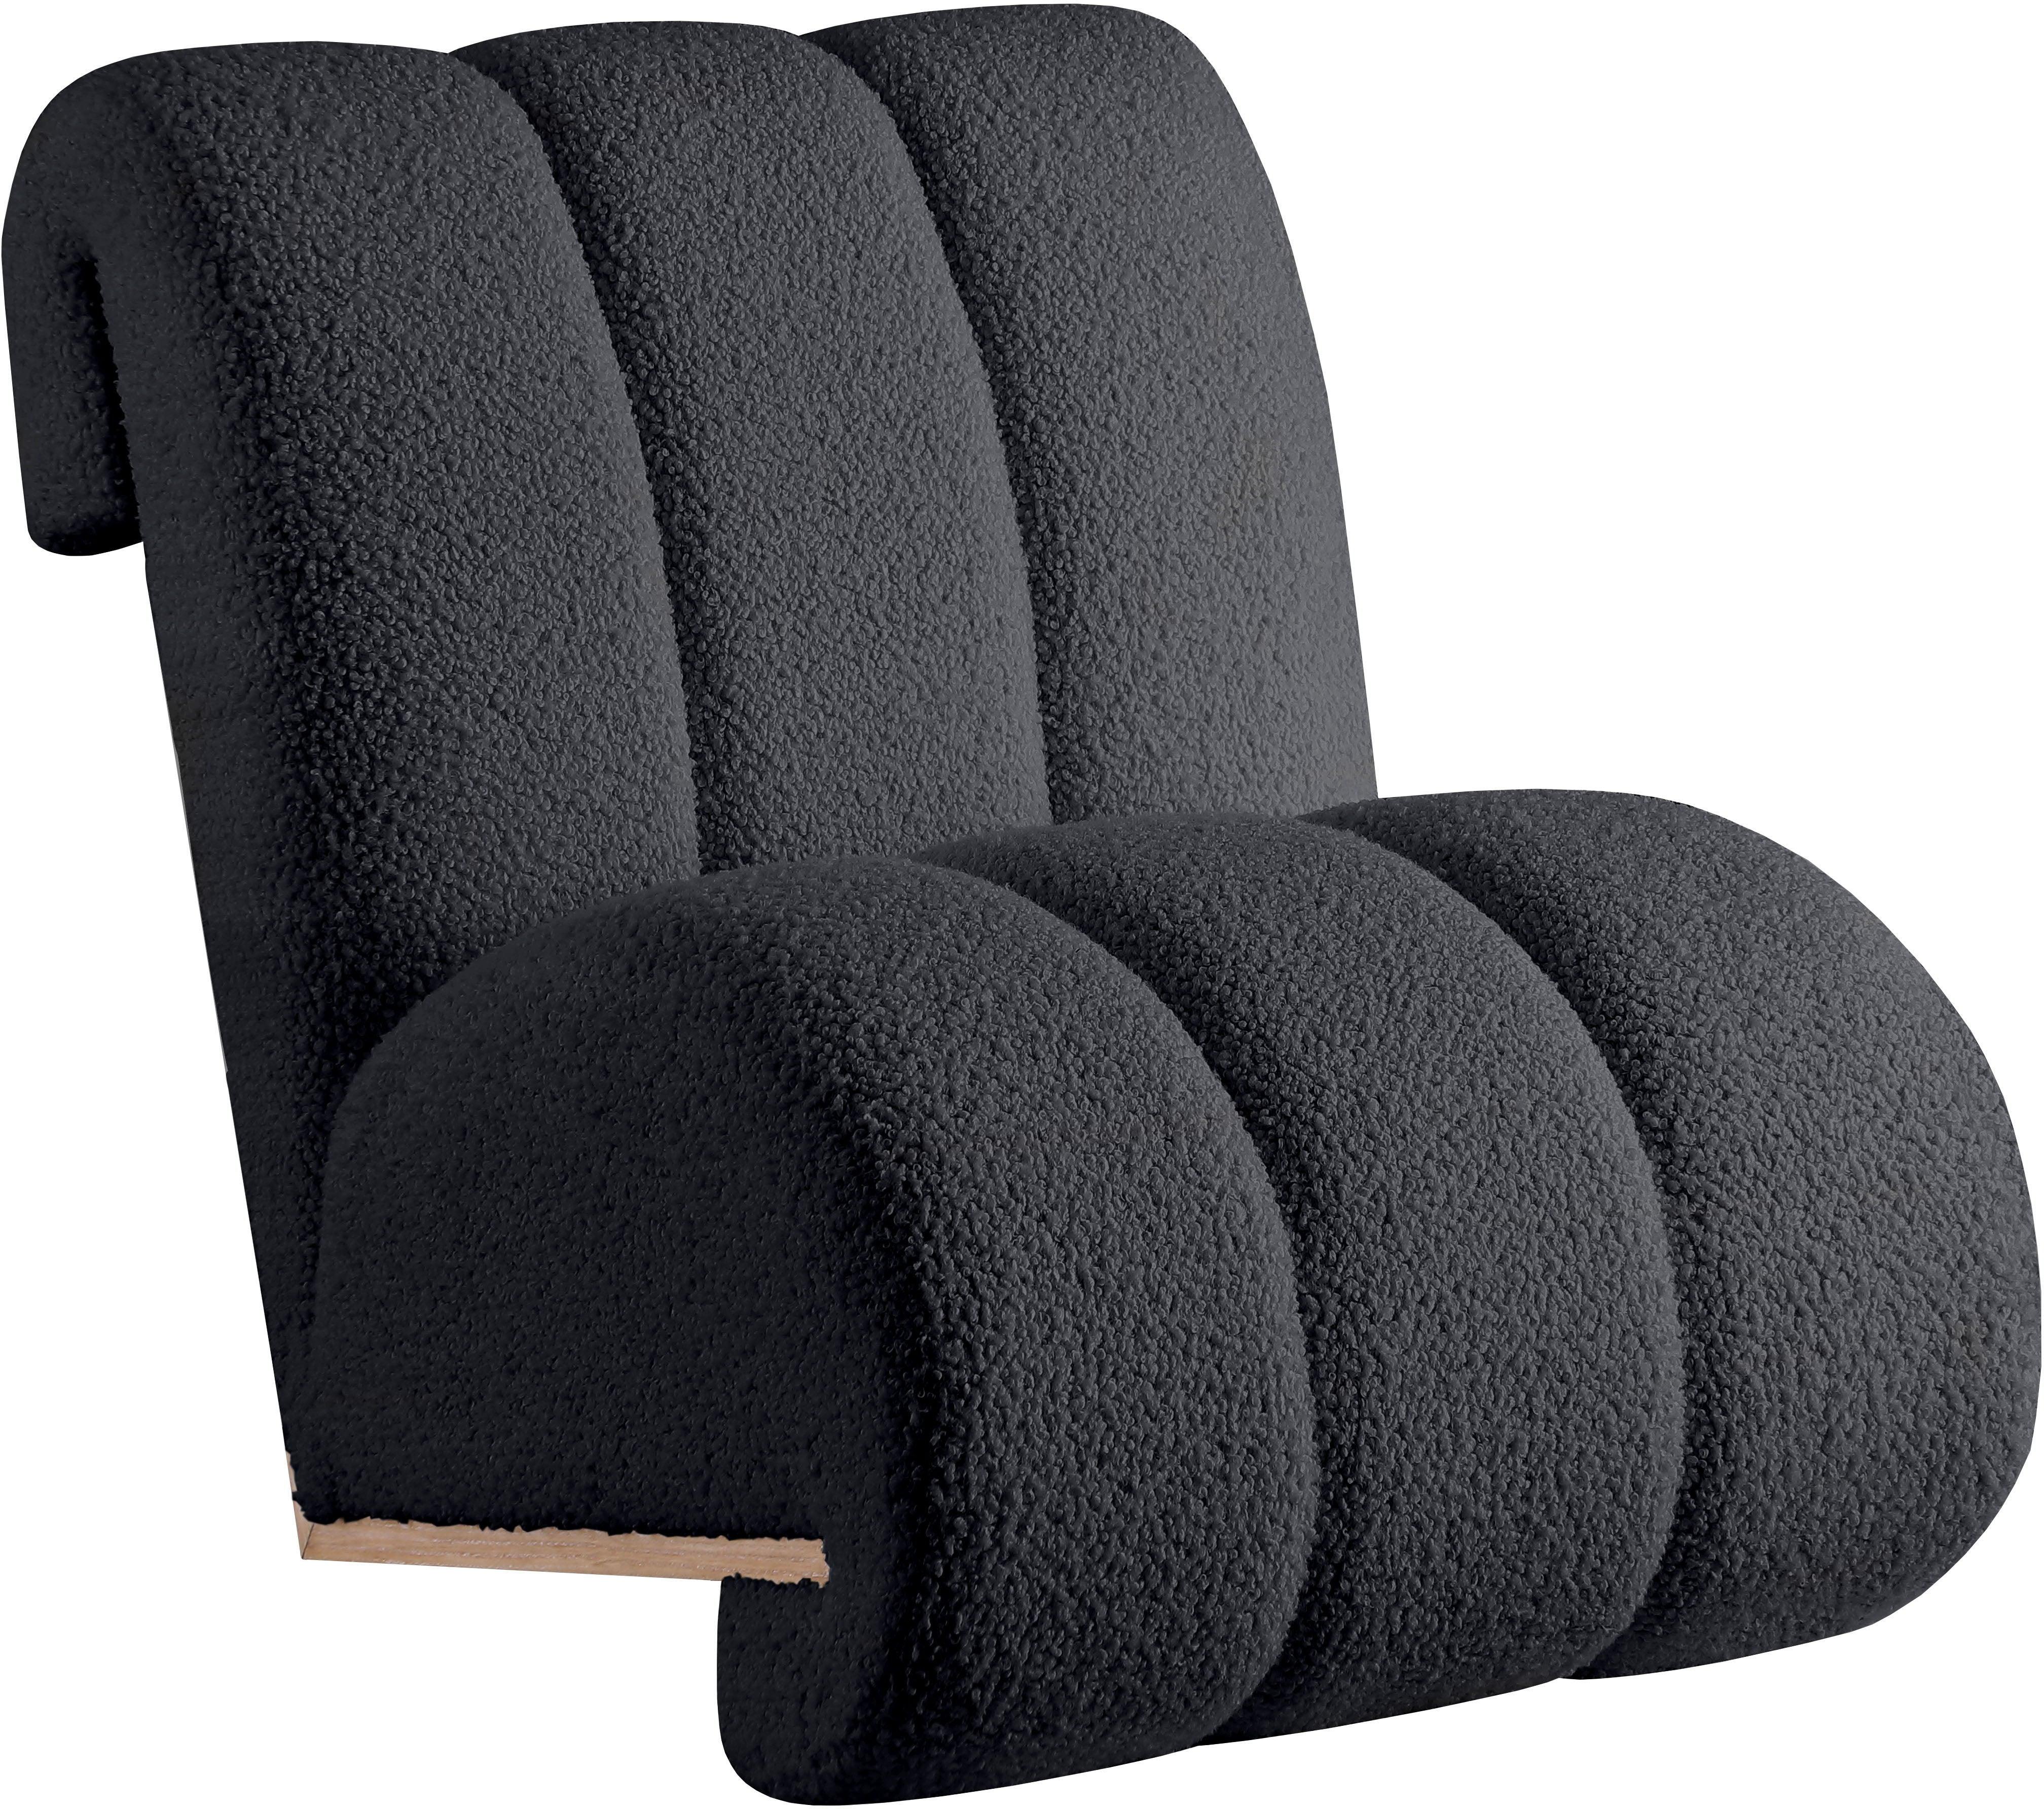 Meridian Furniture - Swoon - Accent Chair - Black - Fabric - 5th Avenue Furniture